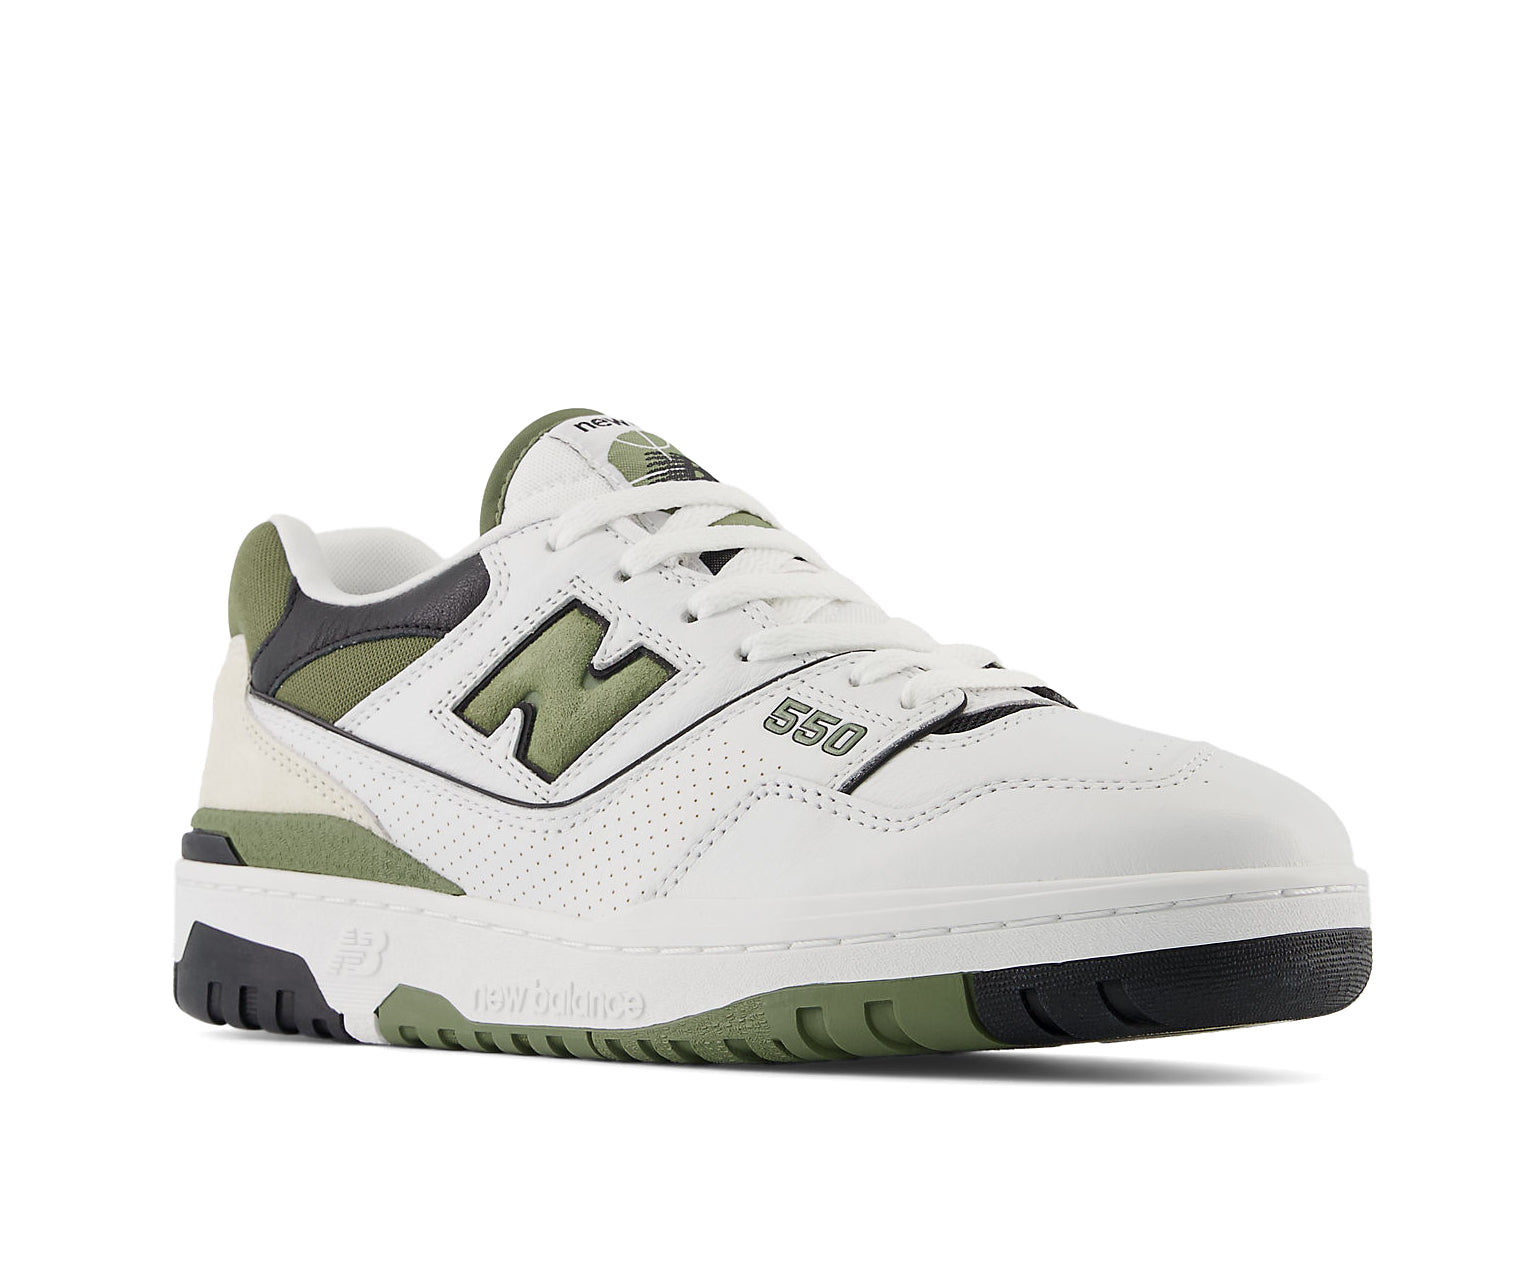 A white leather basketball sneaker with green and black accents from New Balance.